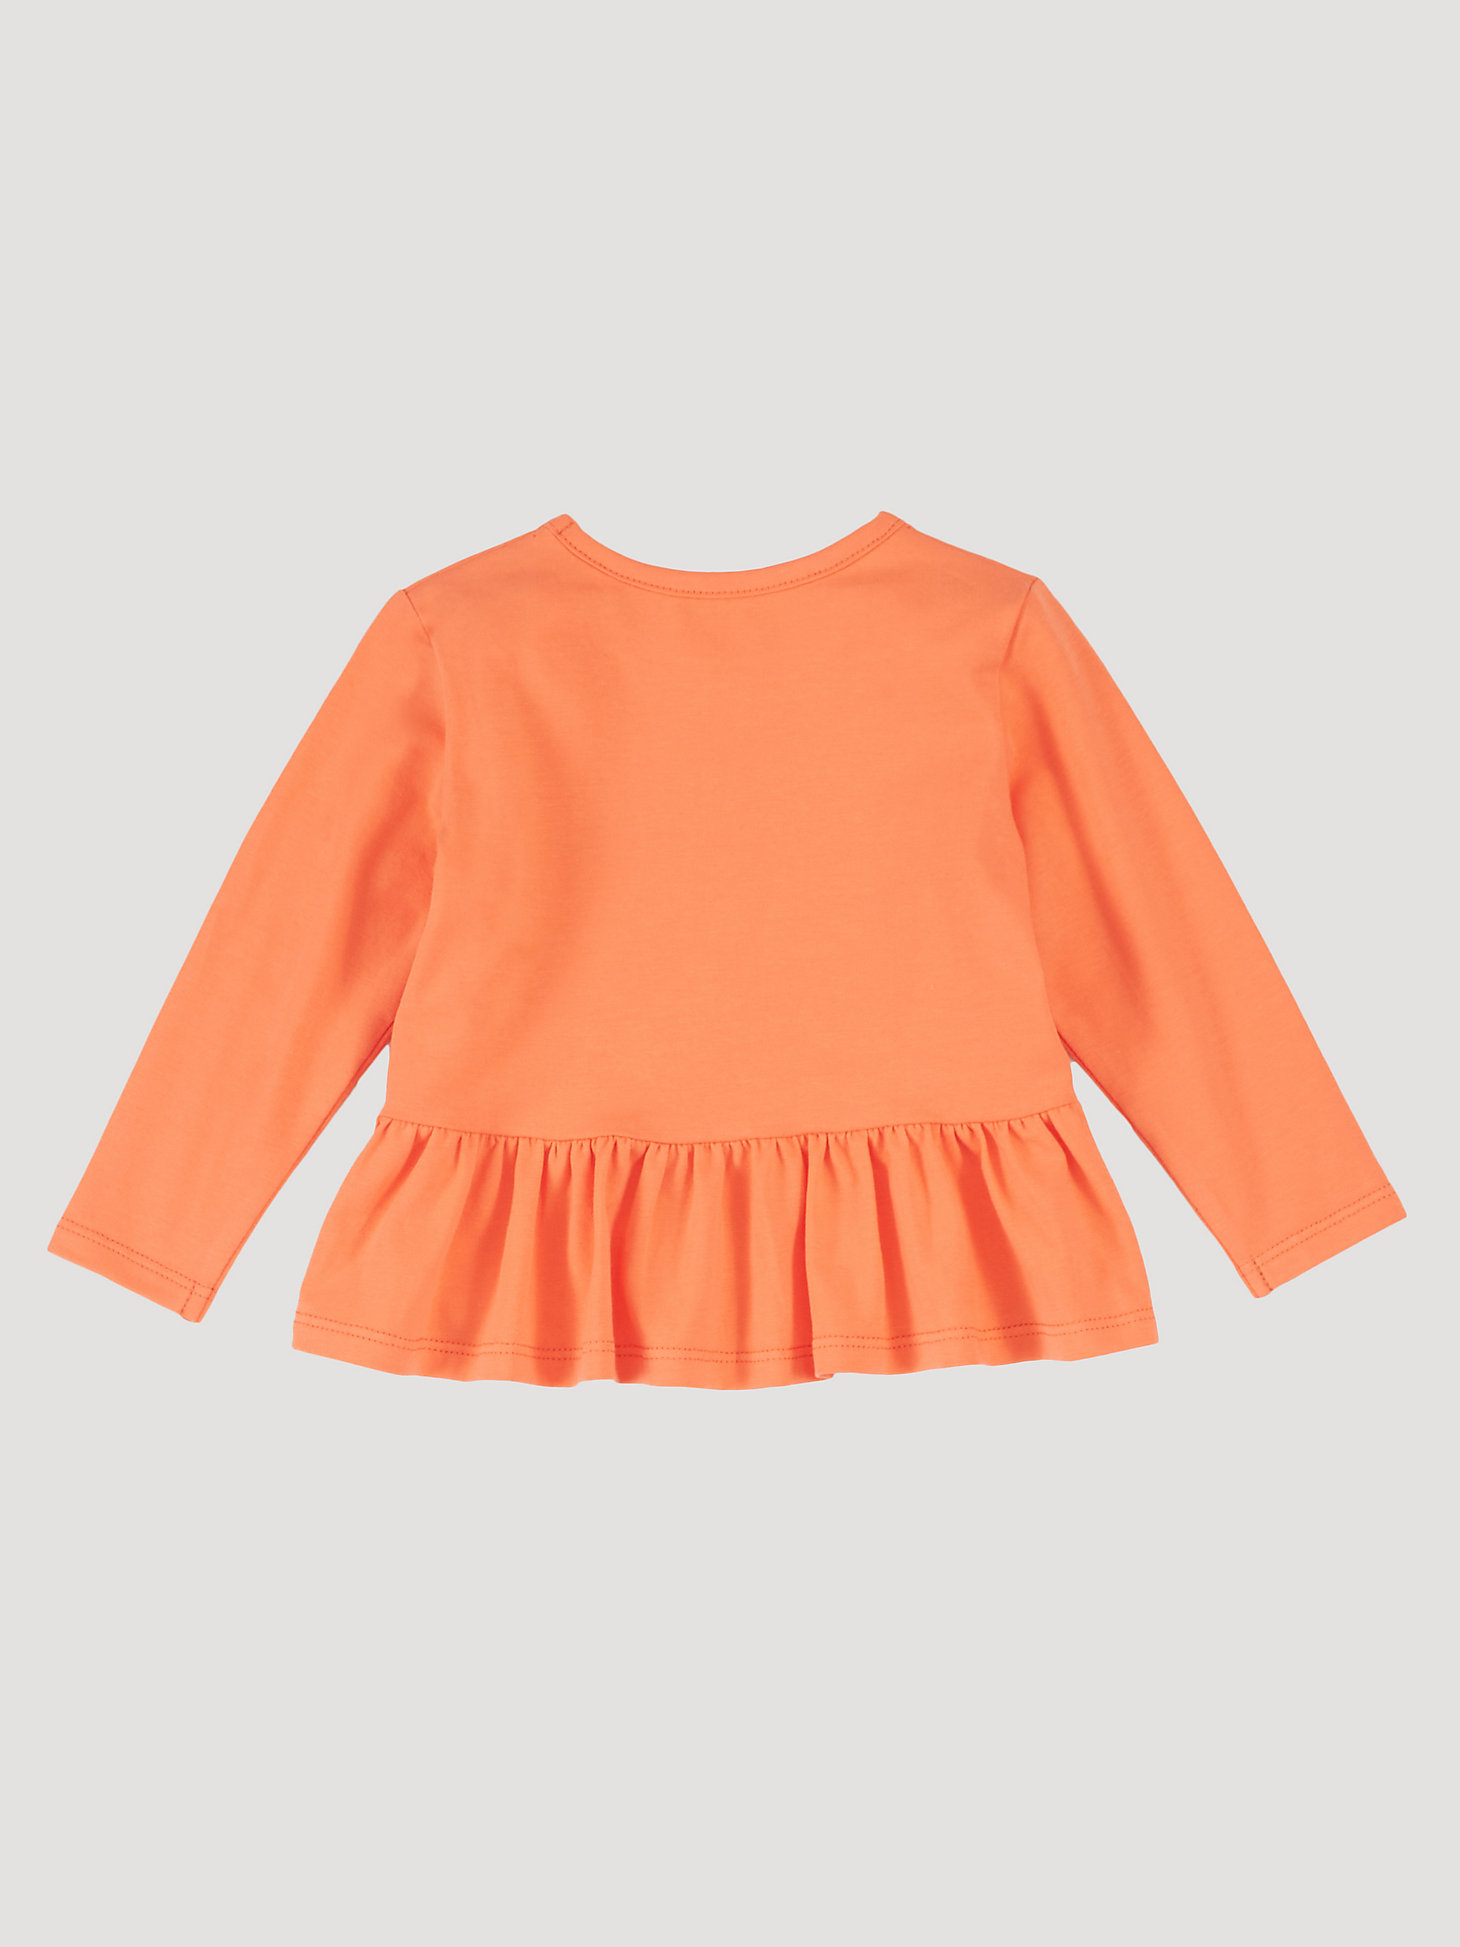 Baby Girl Long Sleeve Rodeo Ready Graphic Tee in Orange alternative view 1